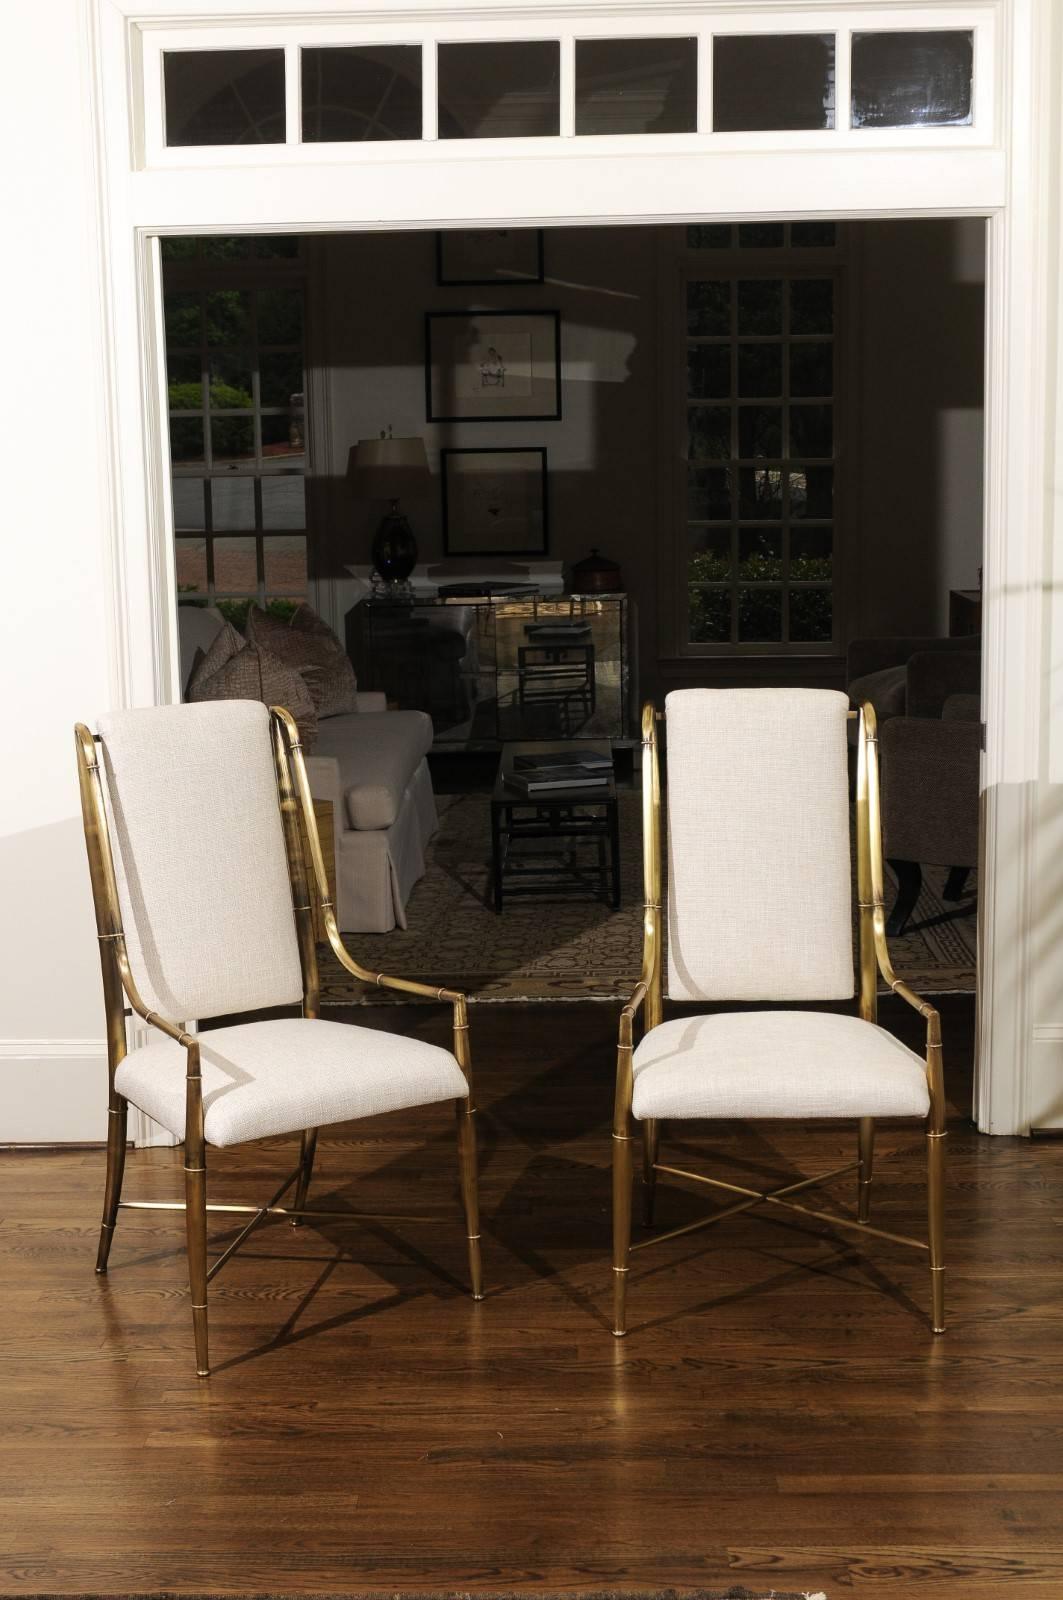 These magnificent dining chairs are shipped as professionally photographed and described in the listing narrative: completely restored and Installation Ready.  Expert custom upholstery service available.

An exquisite set of ten (10) solid brass